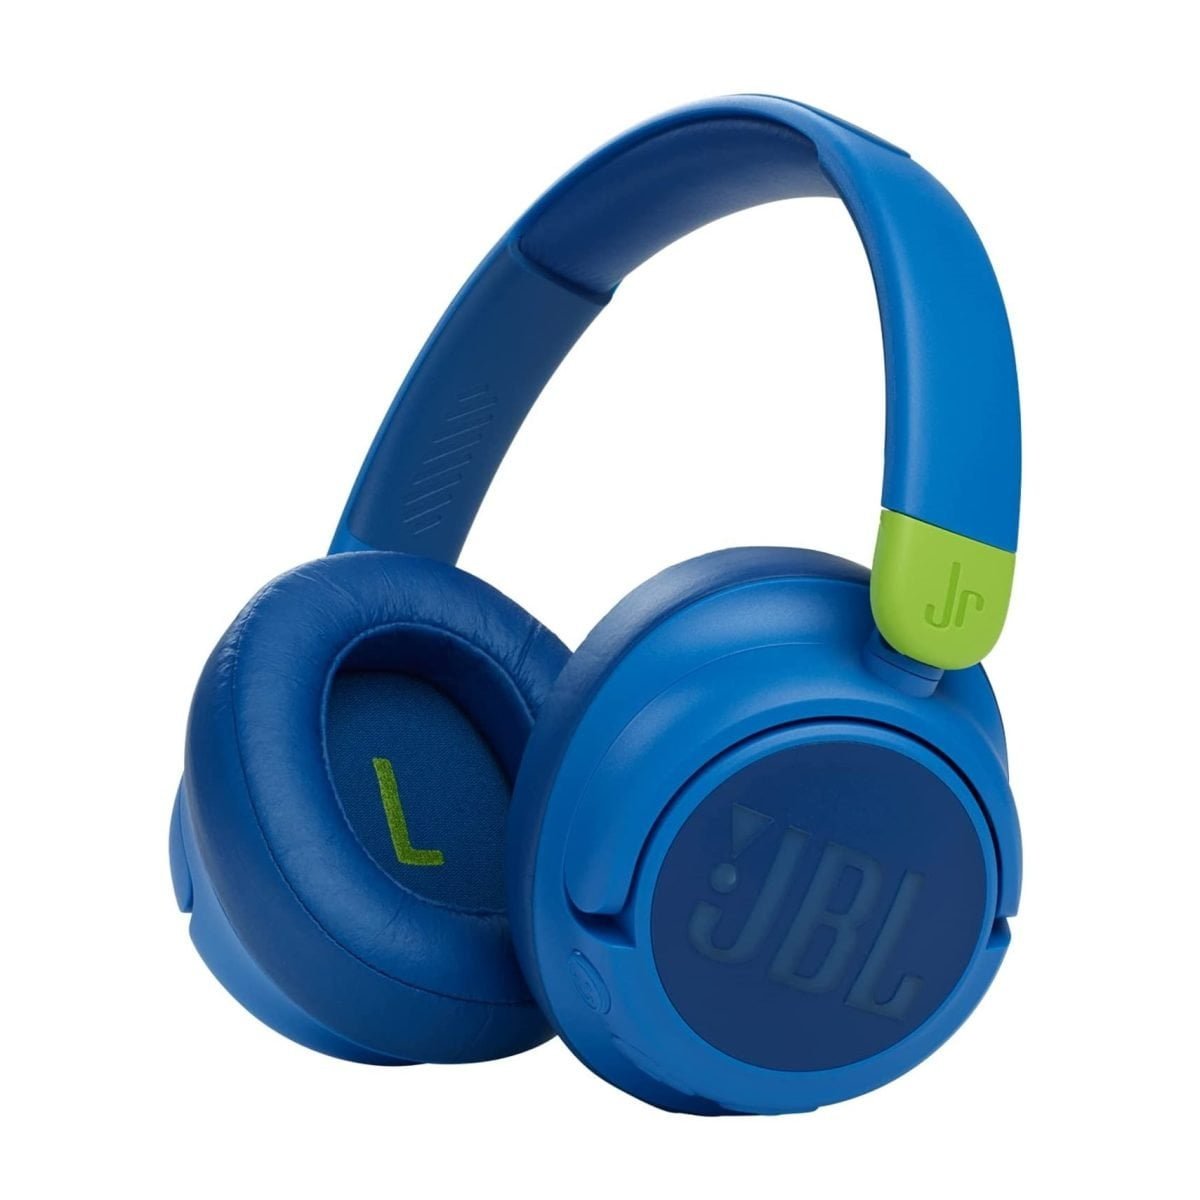 61Xc2Igxegl. Ac Sl1500 Jbl &Amp;Lt;H1&Amp;Gt;Jbl Jr460Nc On-Ear Wireless Headphones For Kids, Blue&Amp;Lt;/H1&Amp;Gt;
Https://Www.youtube.com/Watch?V=Mdaicwkv4Pg Quality Sound Has No Age, But You Want To Be Sure Your Kids Are Safe While Having Fun. With A Maximum Volume Set Under 85Db, They’re Free To Enjoy Jbl Quality Sound, Safely. Shut Out All That Noise And Distraction With Active Noise Cancelling. Your Kids Can Stay Focused Whether They’re Listening To Music, Enjoying Their Favorite Show Or Learning Online. Help Your Kids Stay Connected To The World With The Built-In Mic. They Can Chat Easily With Friends And Family During Downtime, Or Teachers While They’re Busy Learning. Jbl Headphone Jbl Jr460Nc On-Ear Wireless Headphones For Kids, Blue